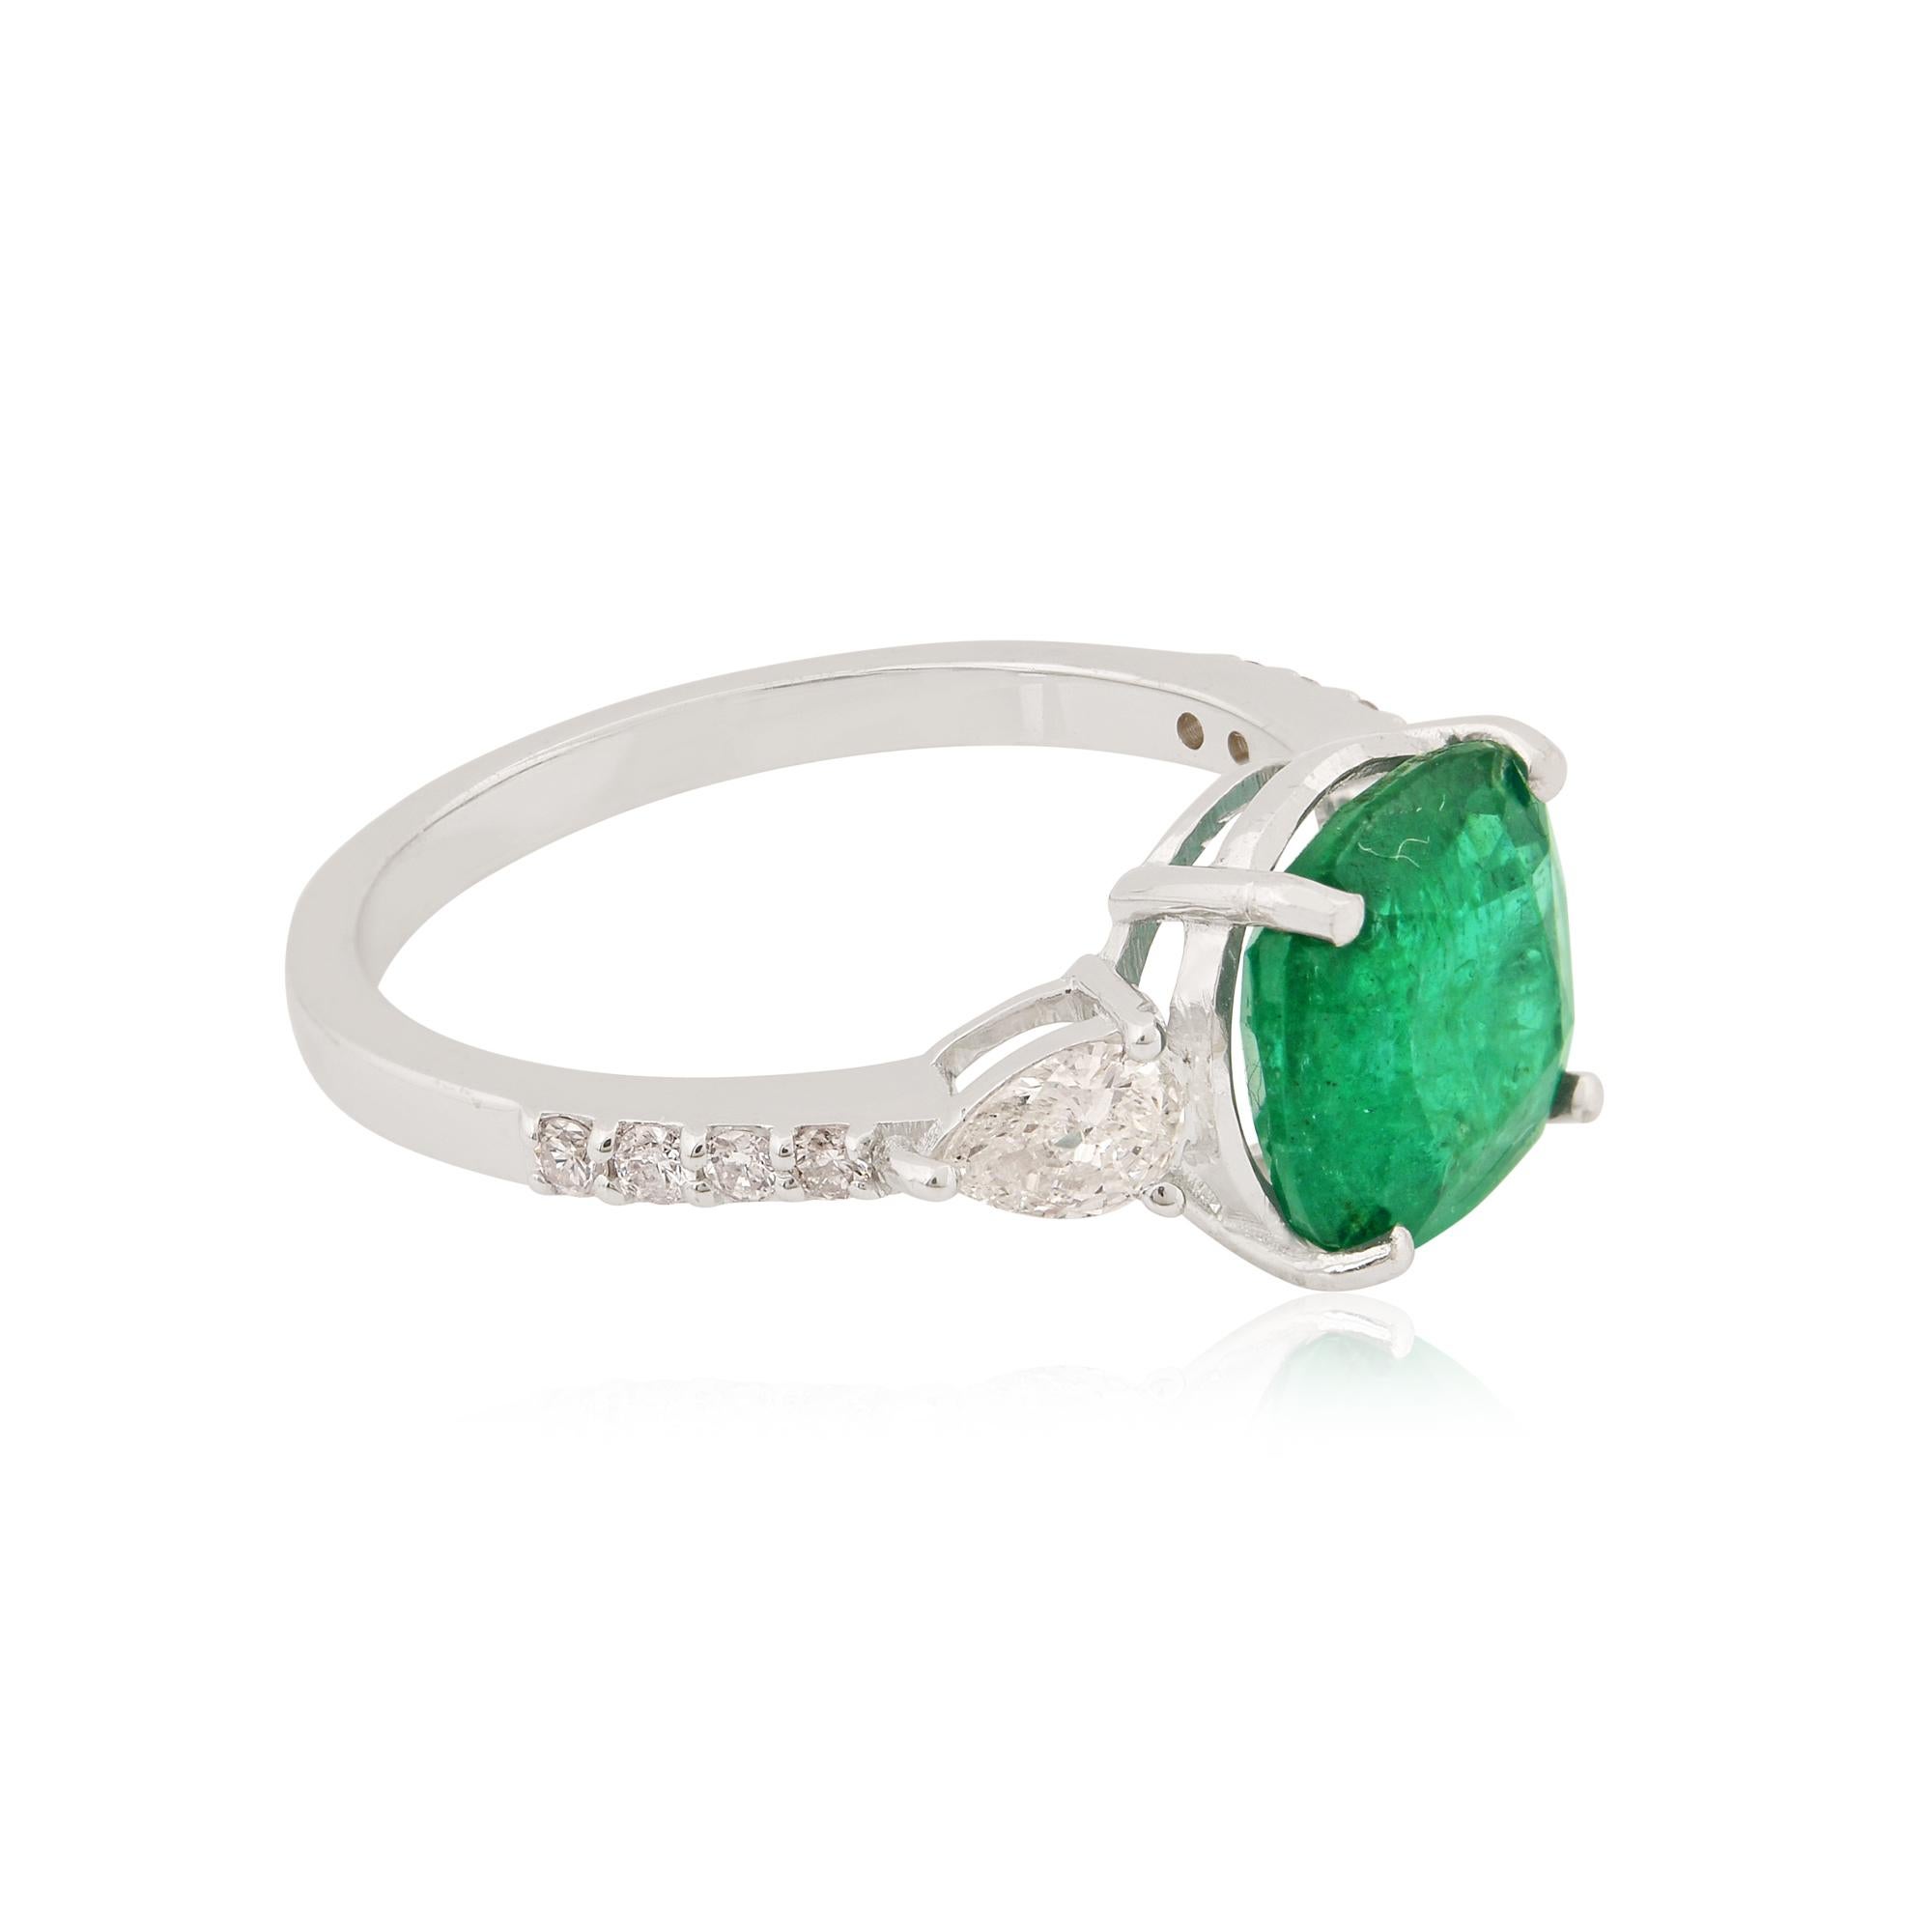 For Sale:  Natural Emerald Cocktail Ring Pear Diamond Solid 18k White Gold Handmade Jewelry 5